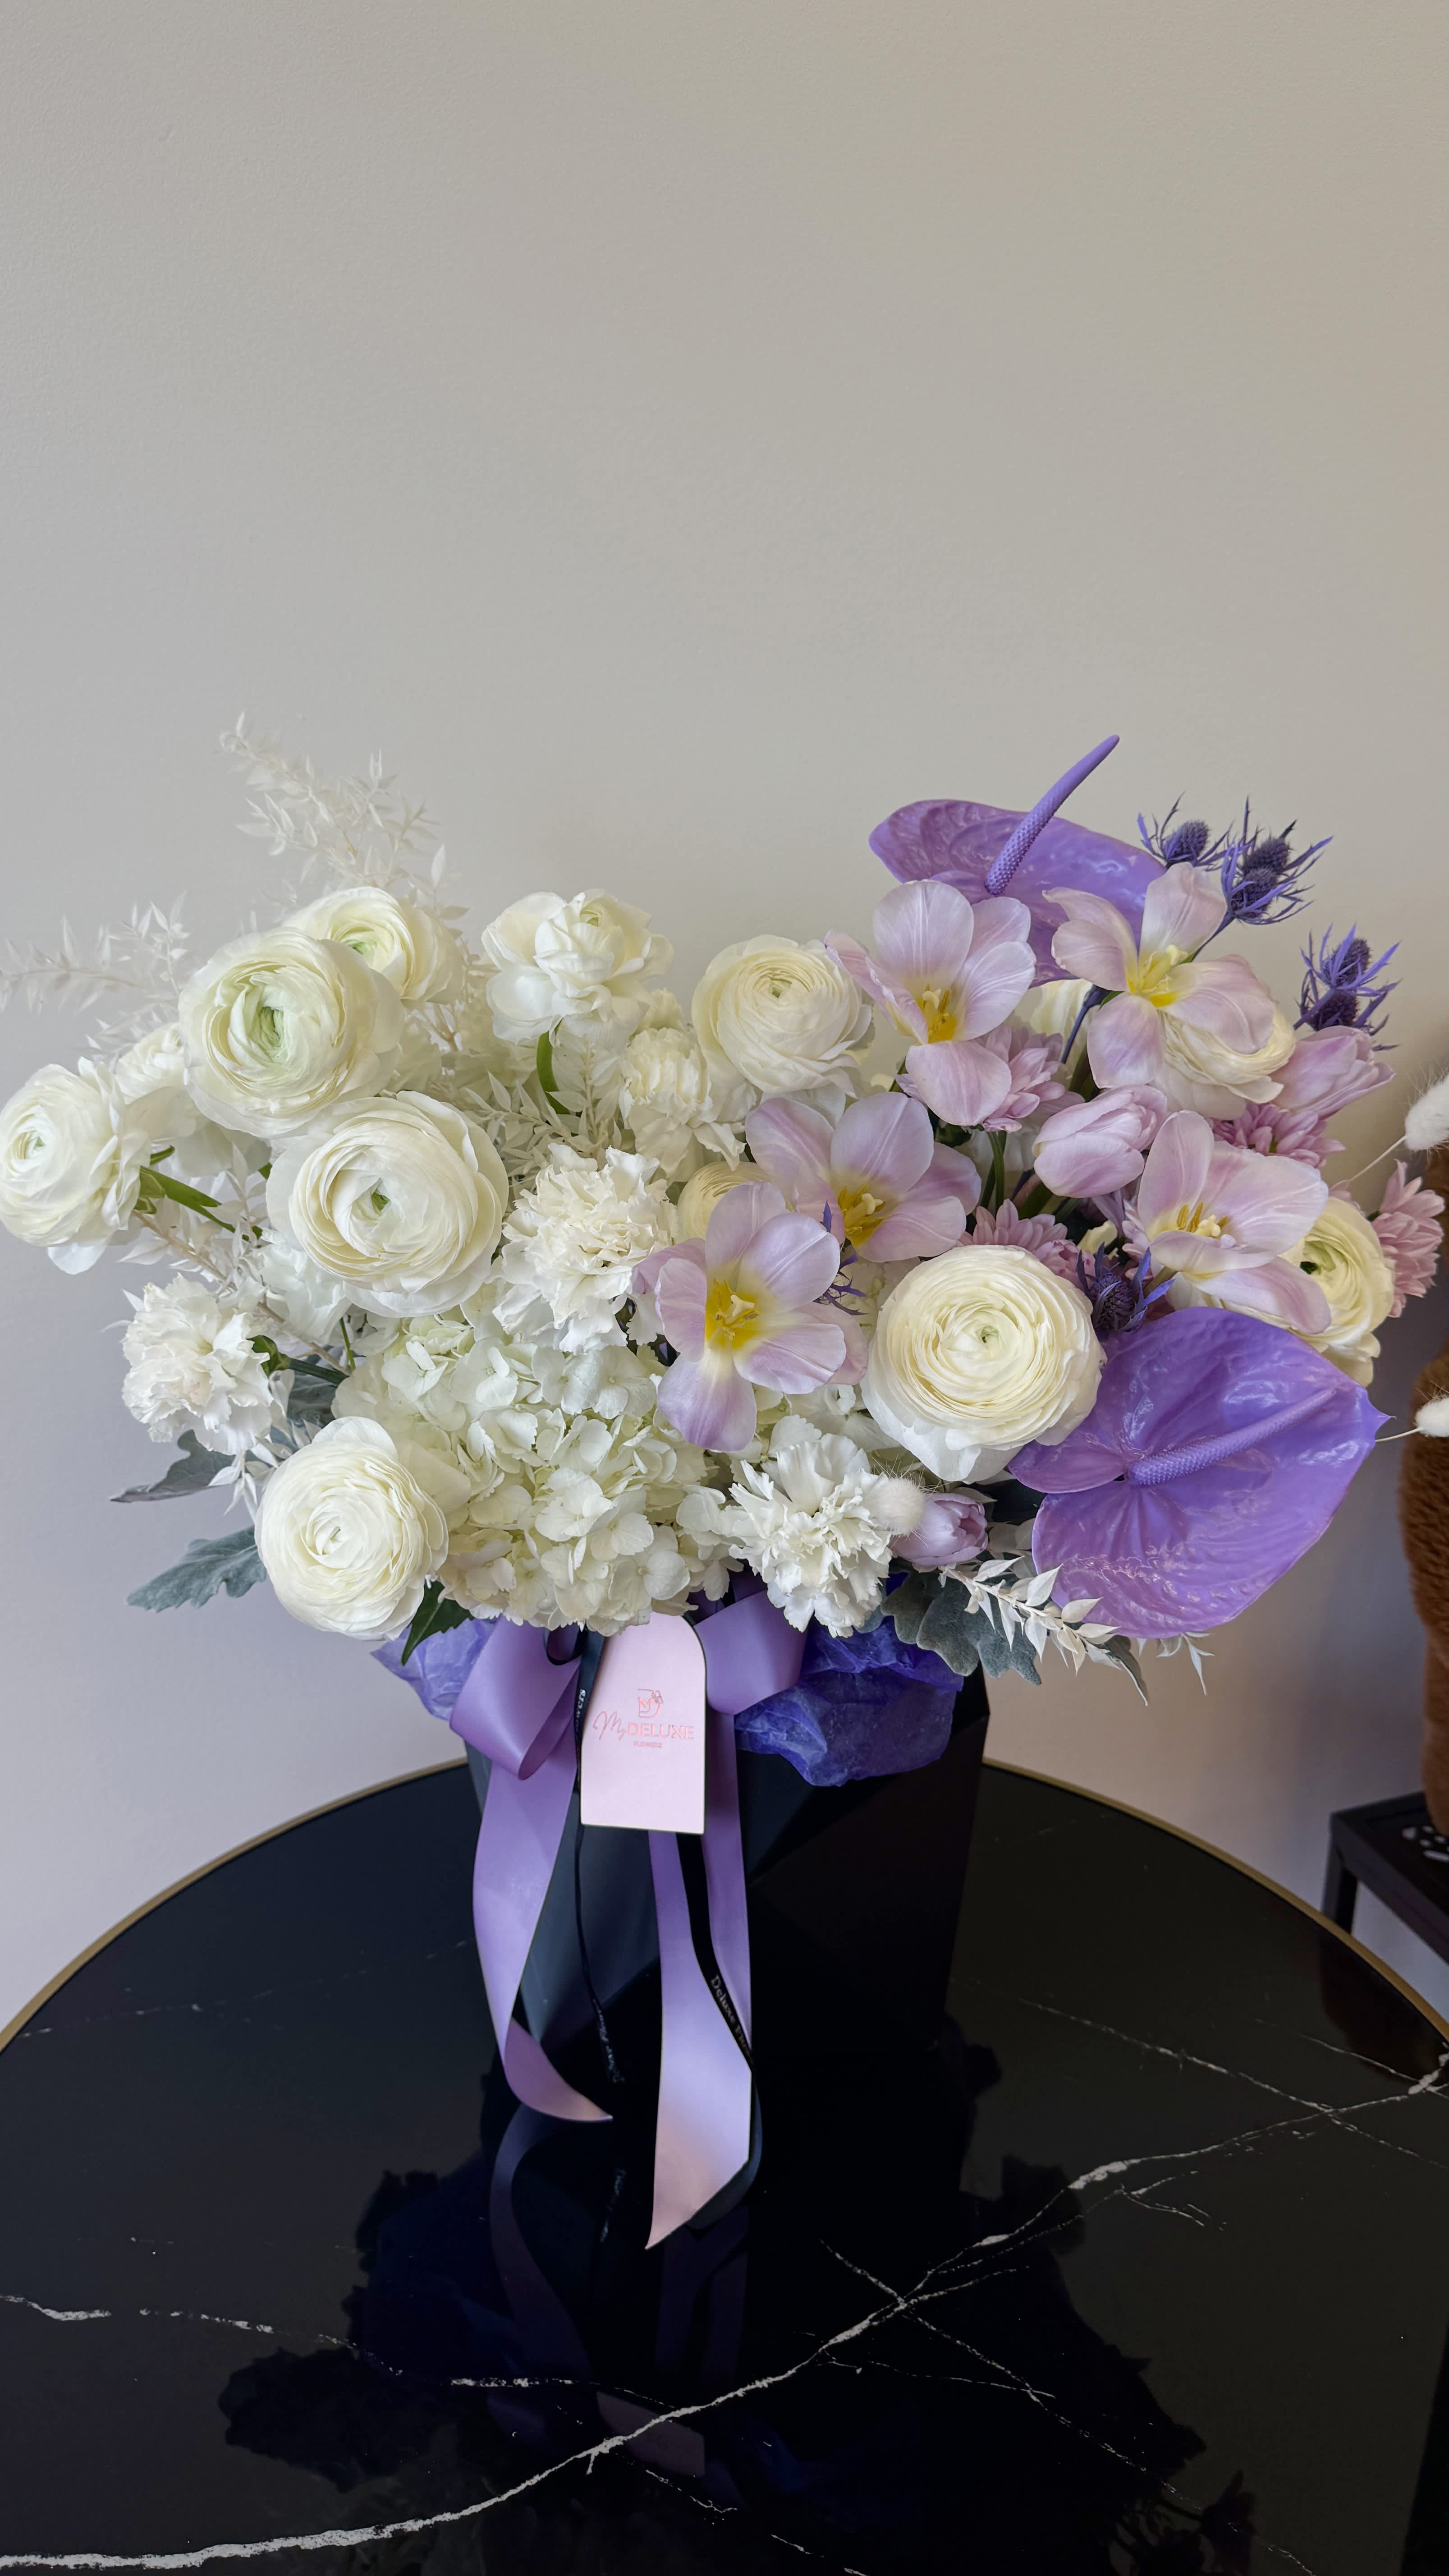 Bohemian Bliss Blooms - Flowers will be delivered approximately as pictured